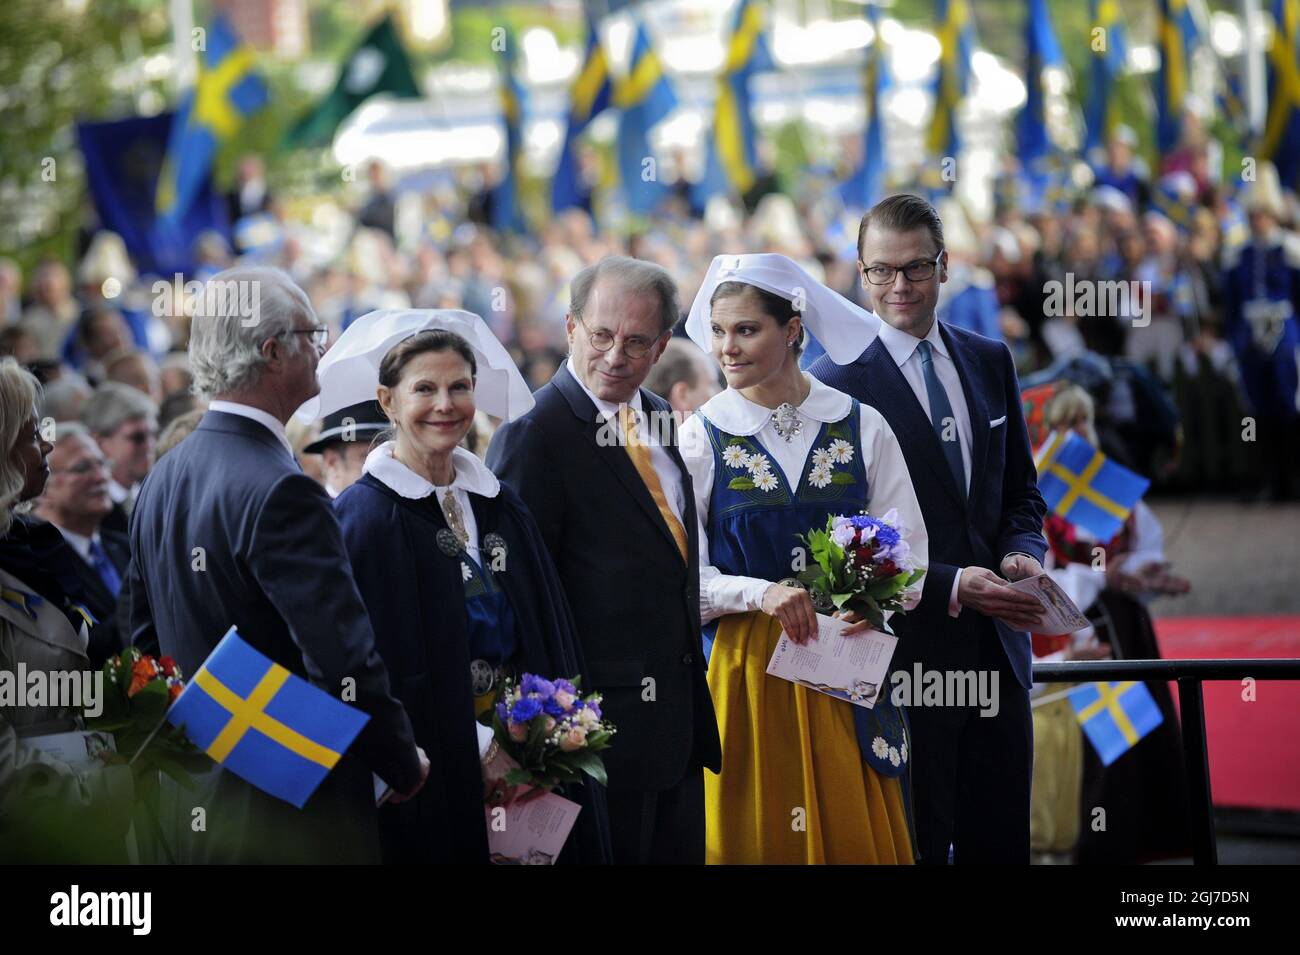 STOCKHOLM 20120606 (L-R) Swedish King Carl XVI Gustaf, Queen Silvia, Speaker of Parliament Per Westerberg, Crown Princess Victoria and Prince Daniel arrive to Skansen Museum to celebrate the Swedish national day in Stockholm, Sweden, June 6, 2012. Photo: Jessica Gow / SCANPIX SWEDEN / Code 10070                     Stock Photo